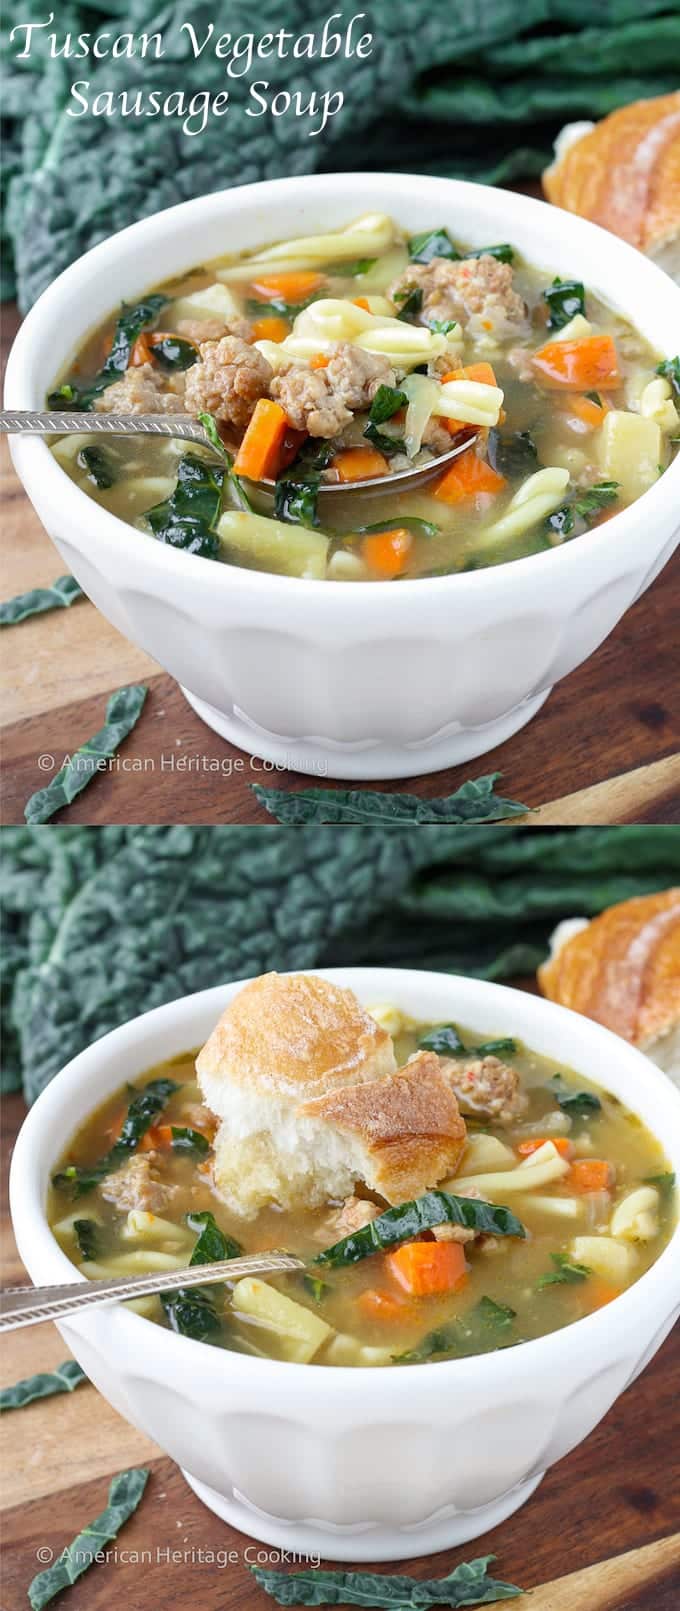 Two bowls of Italian sausage soup in a collage.